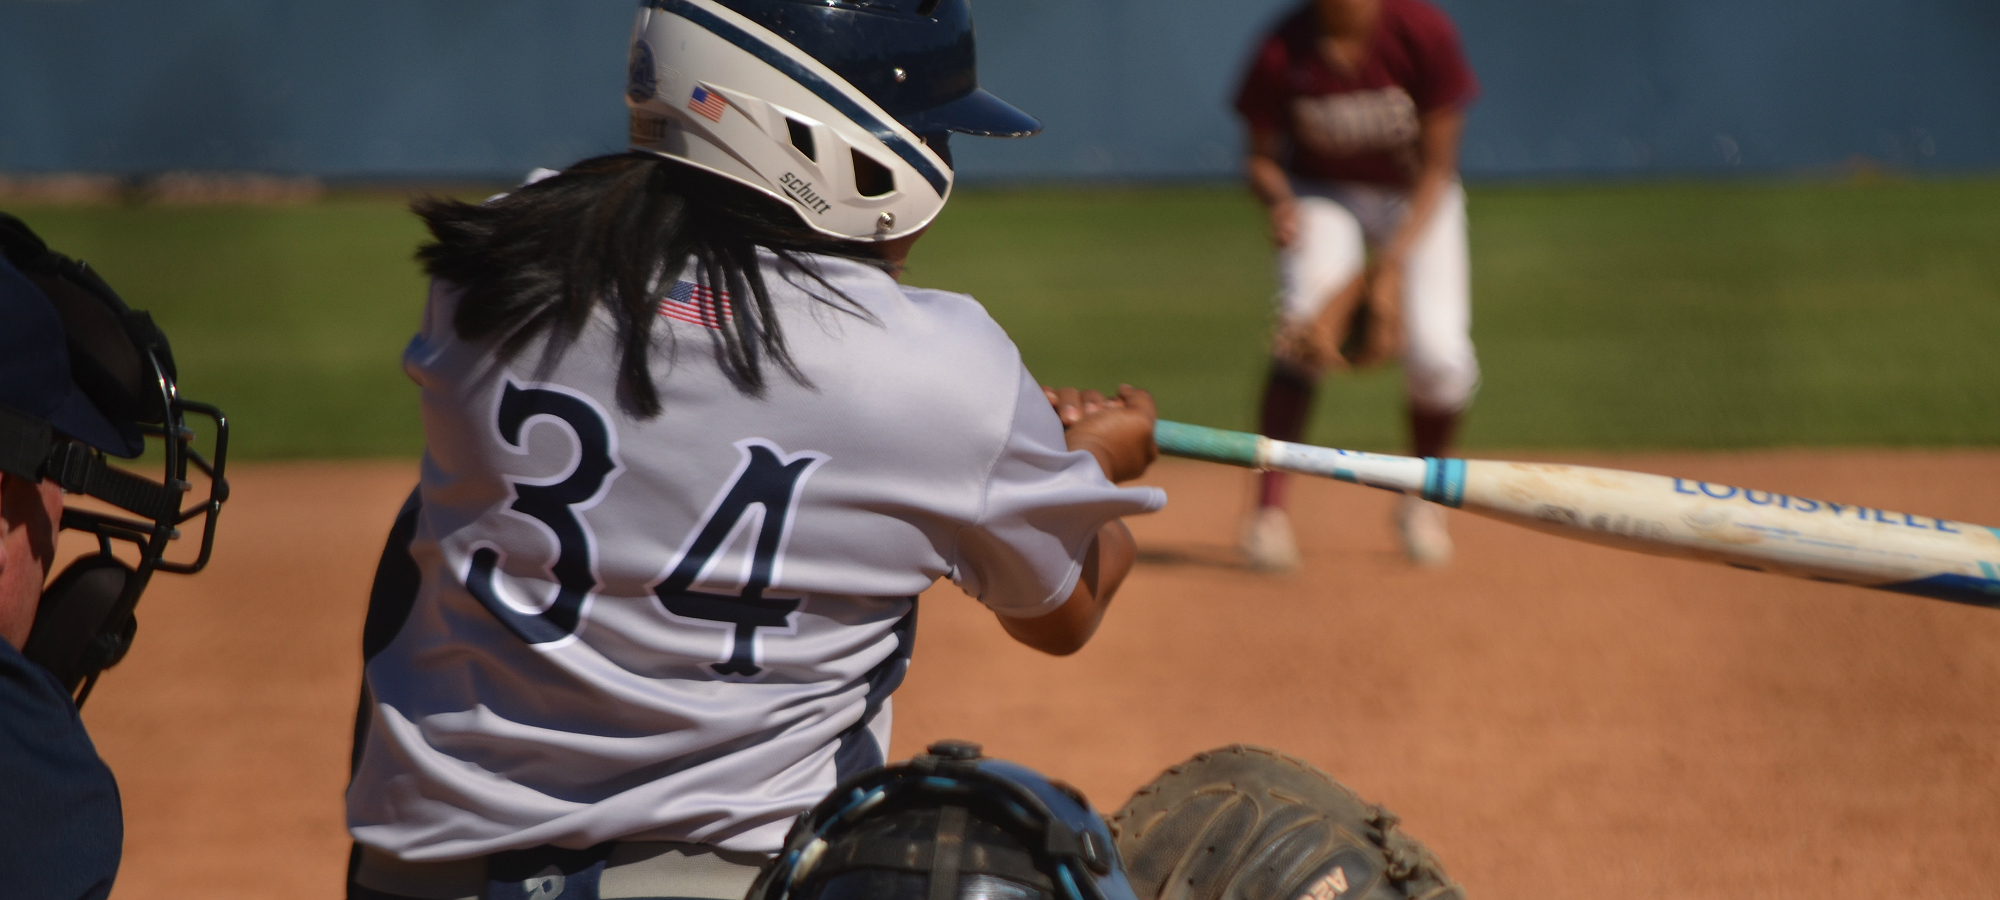 Cervantes went 3-for-4 and scored three runs. She knocked the go-head runs at the time in the 5th for the Crusaders.